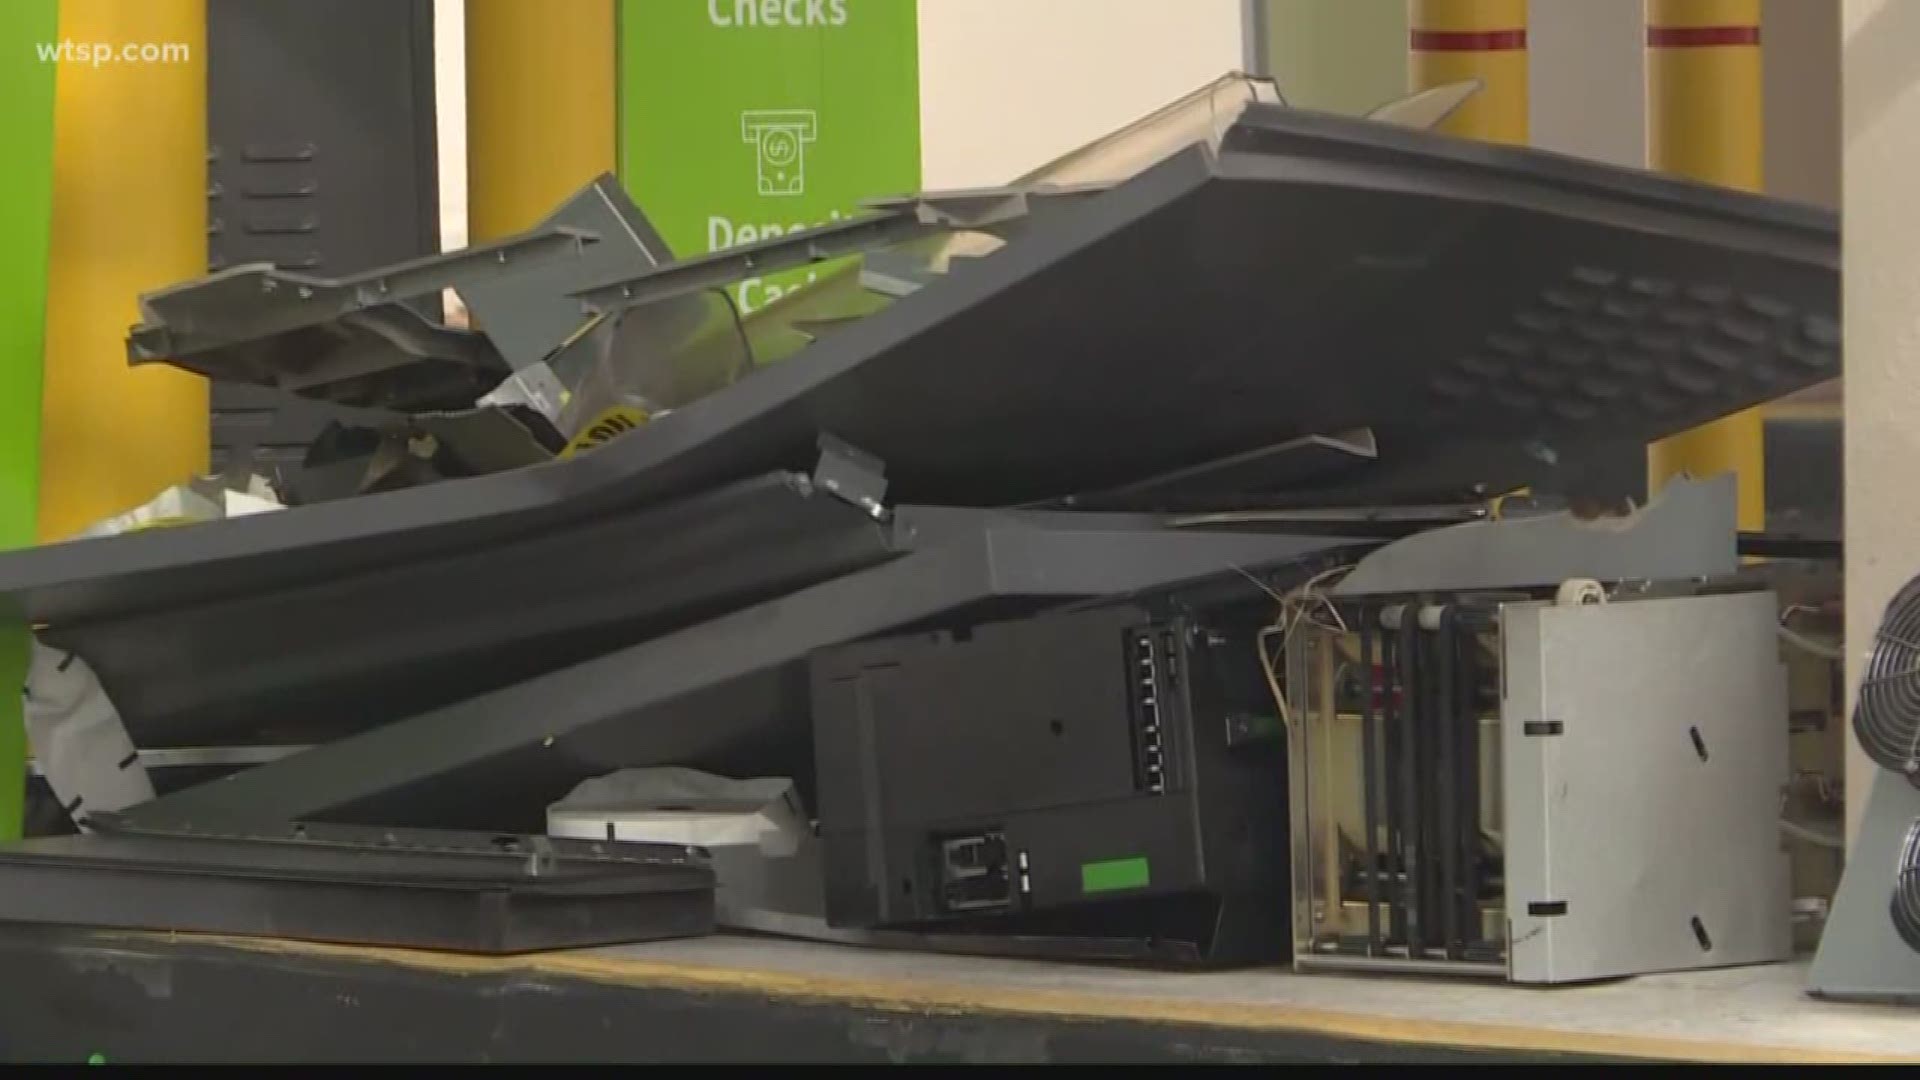 The Hillsborough County Sheriff's Office said it's trying to figure out if a recent ATM explosion in Valrico is connected to other ATM explosions in the area.